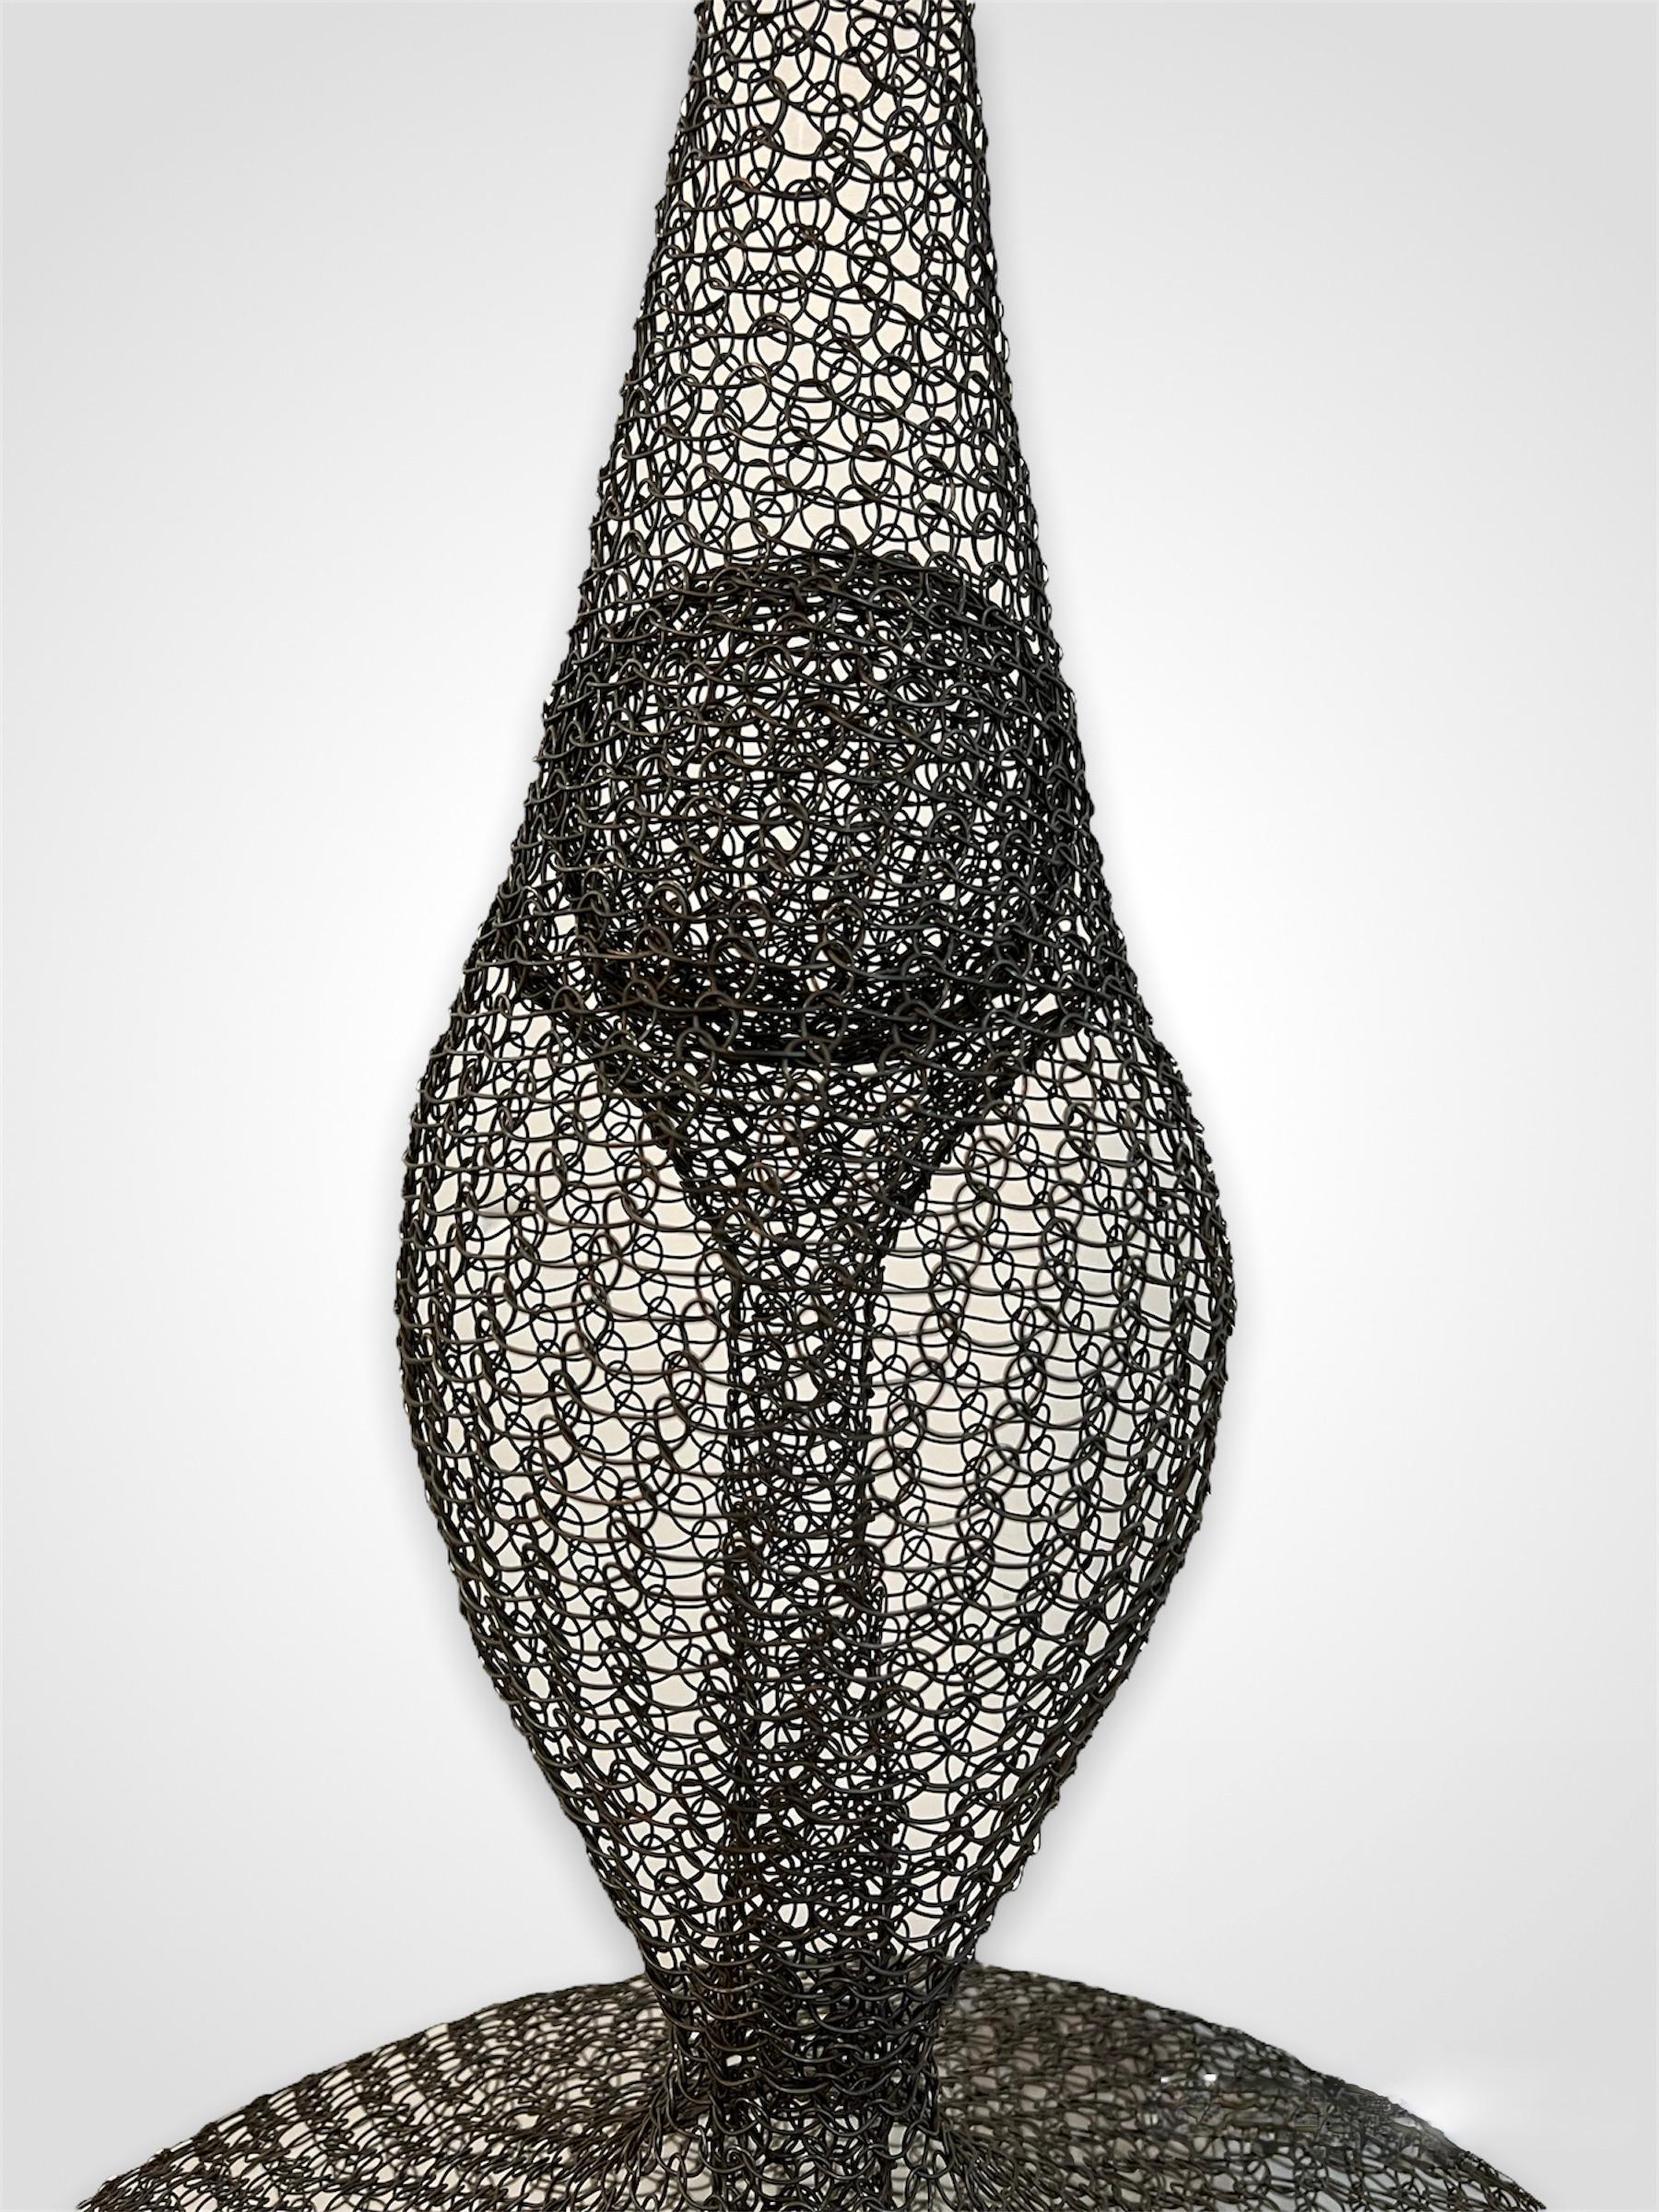 French Organic Woven Mesh Wire Sculpture by Ulrikk Dufosse For Sale